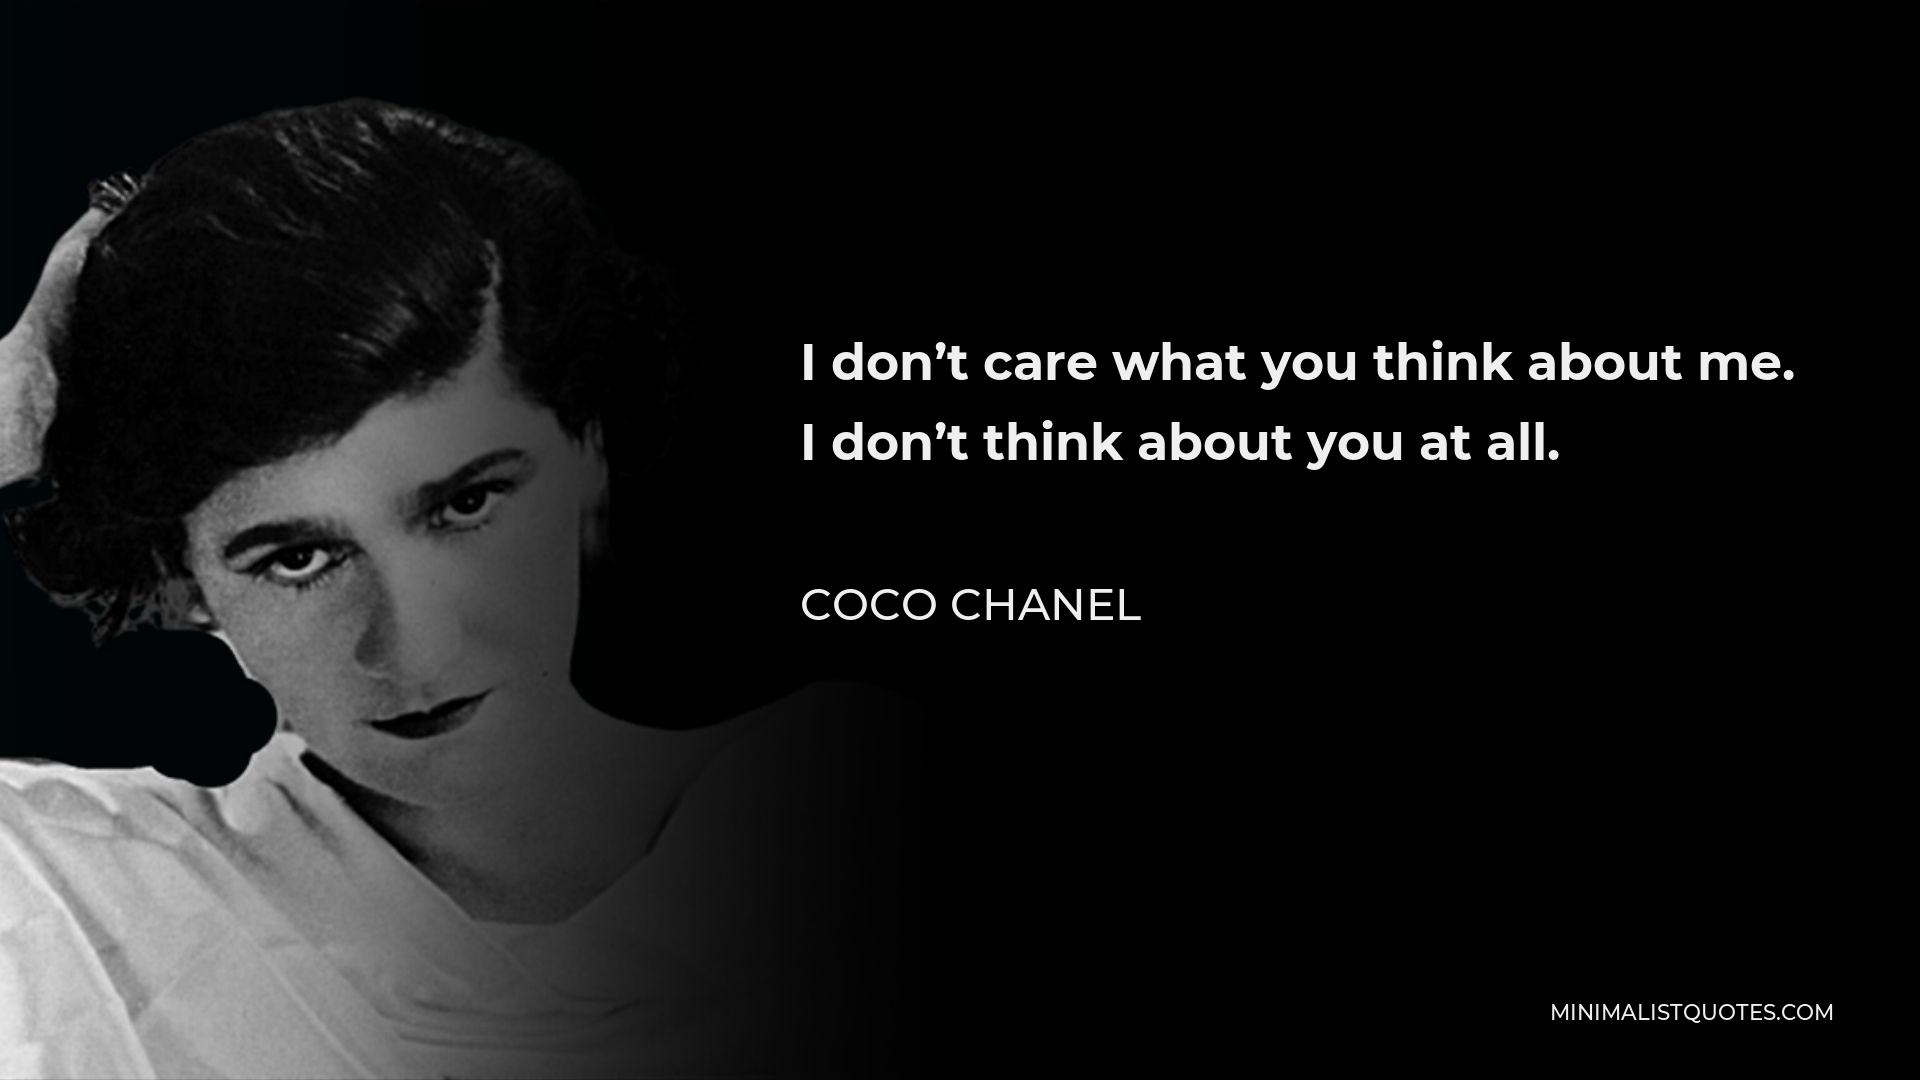 Coco Chanel Quote - I don’t care what you think about me. I don’t think about you at all.